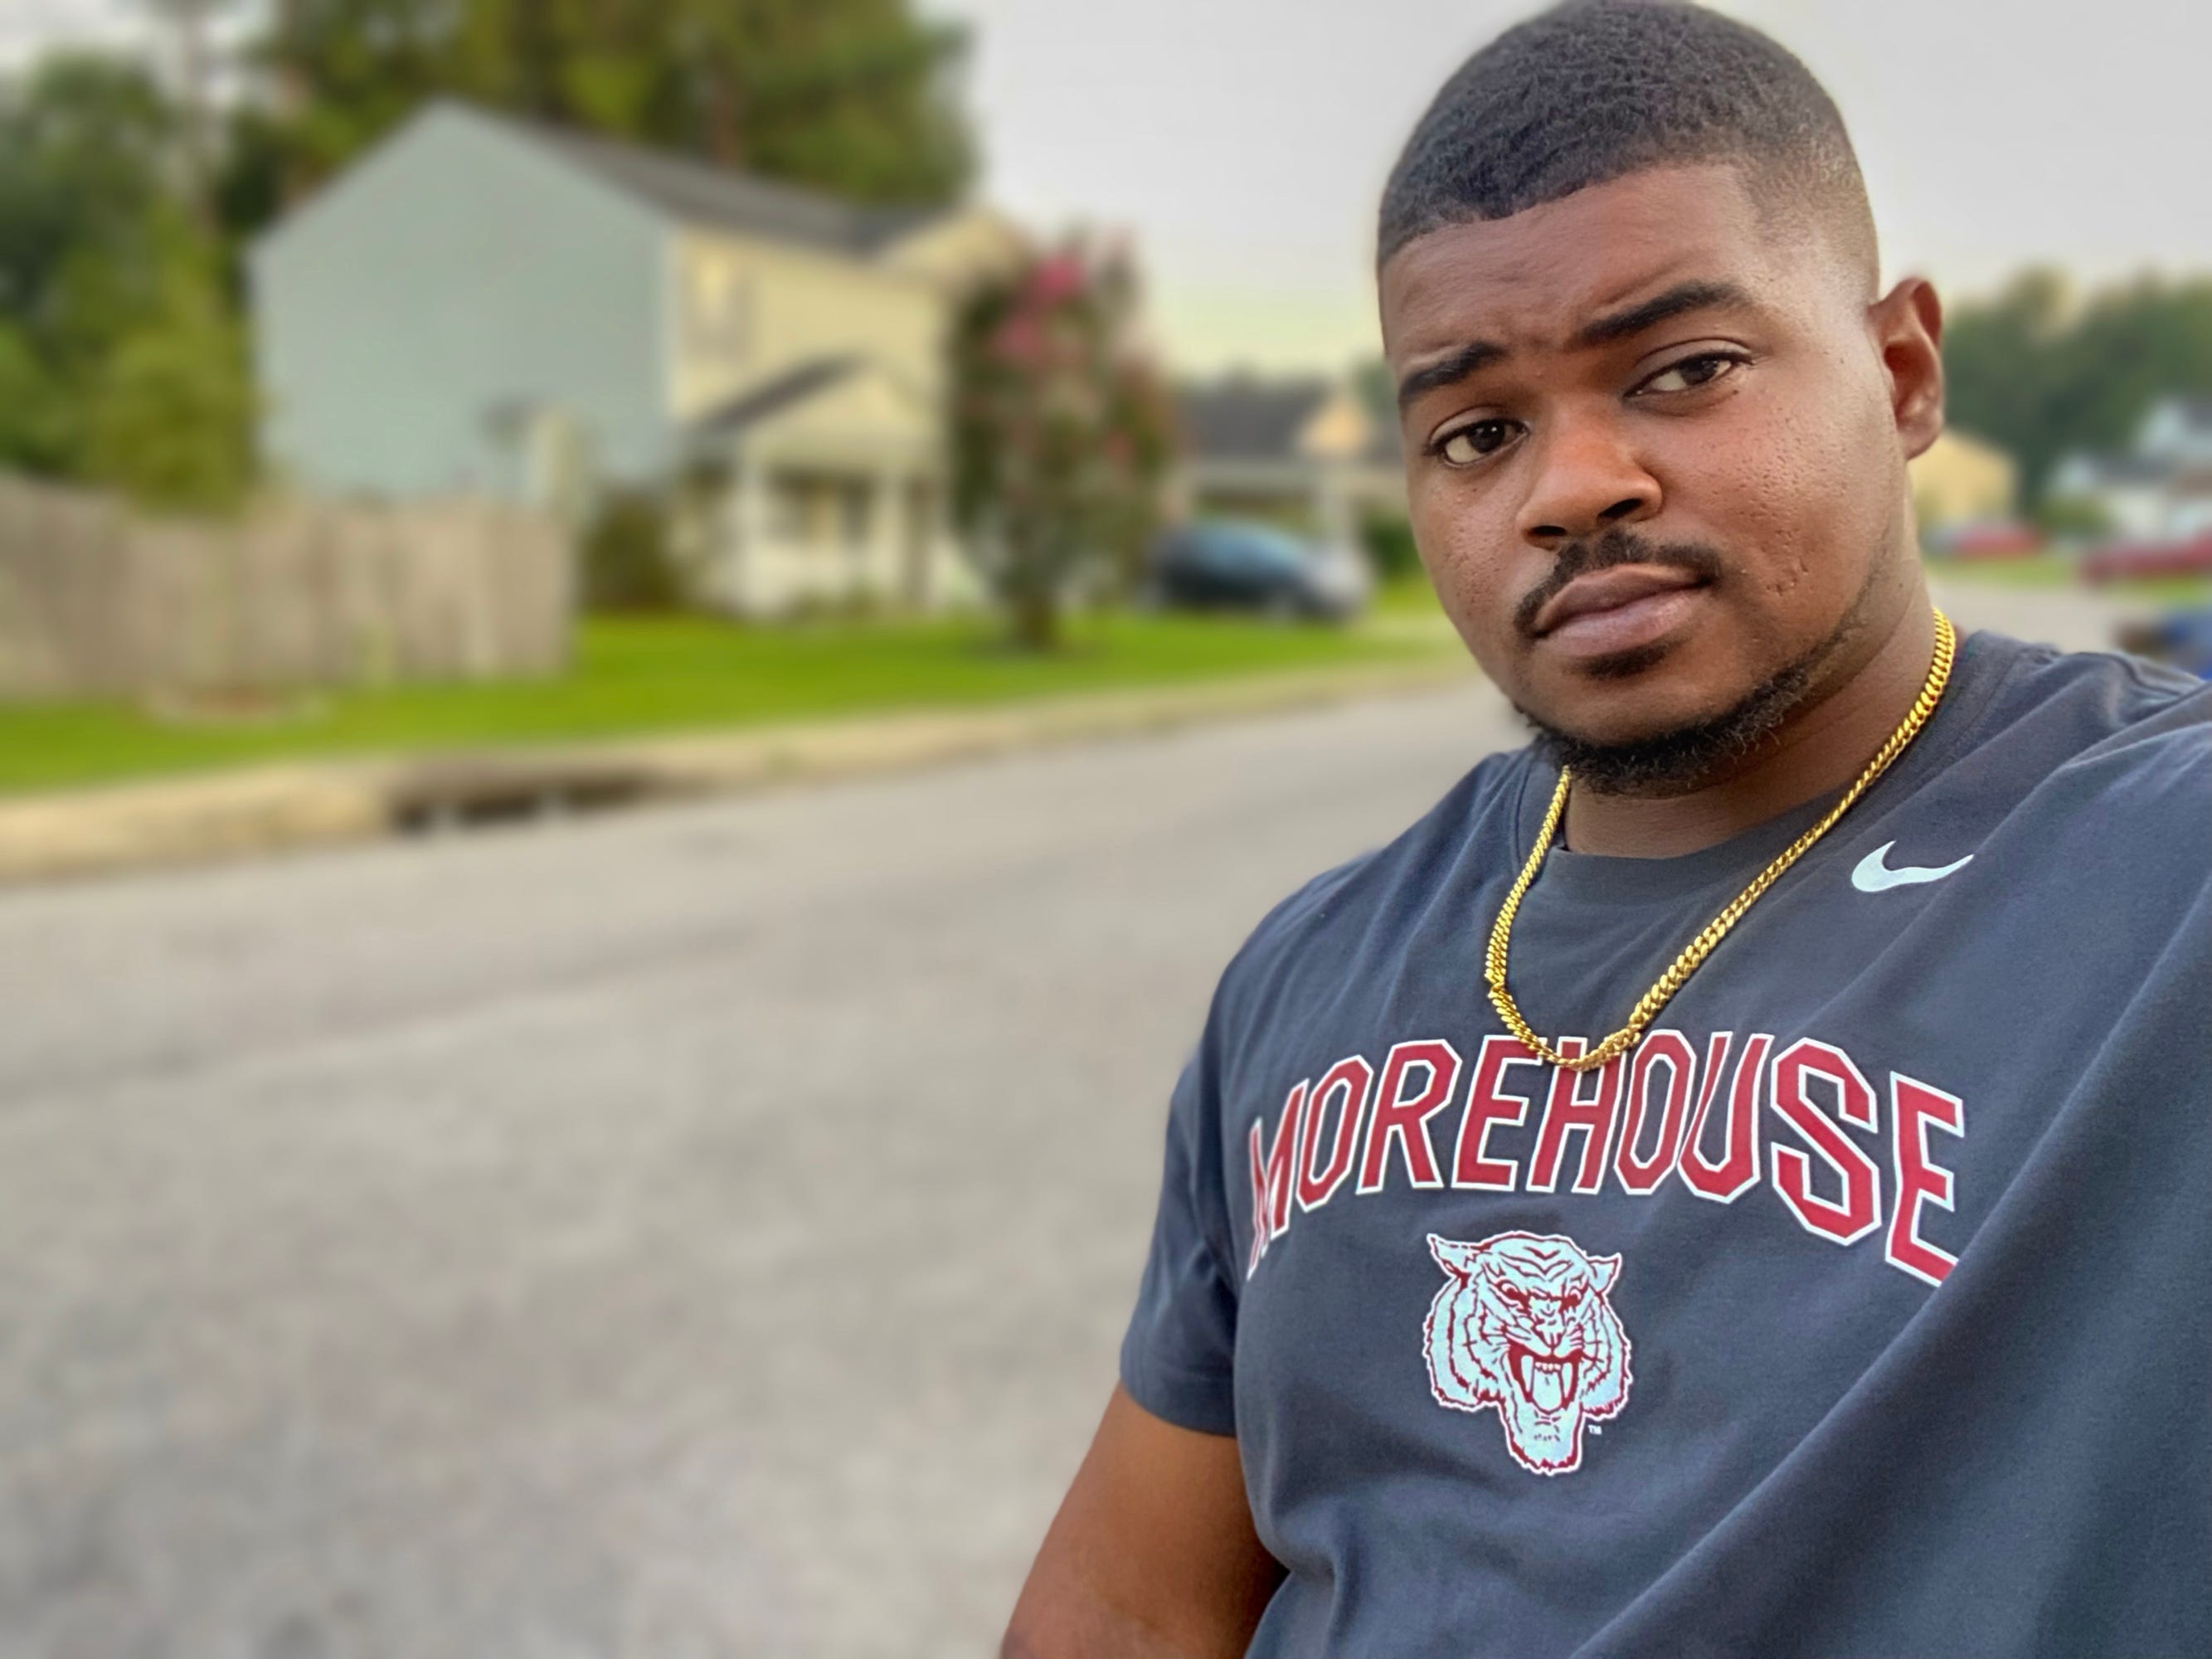 Dayne Burns left Morehouse Online after he said the advertised computer science degree he hoped to obtain never materialized.